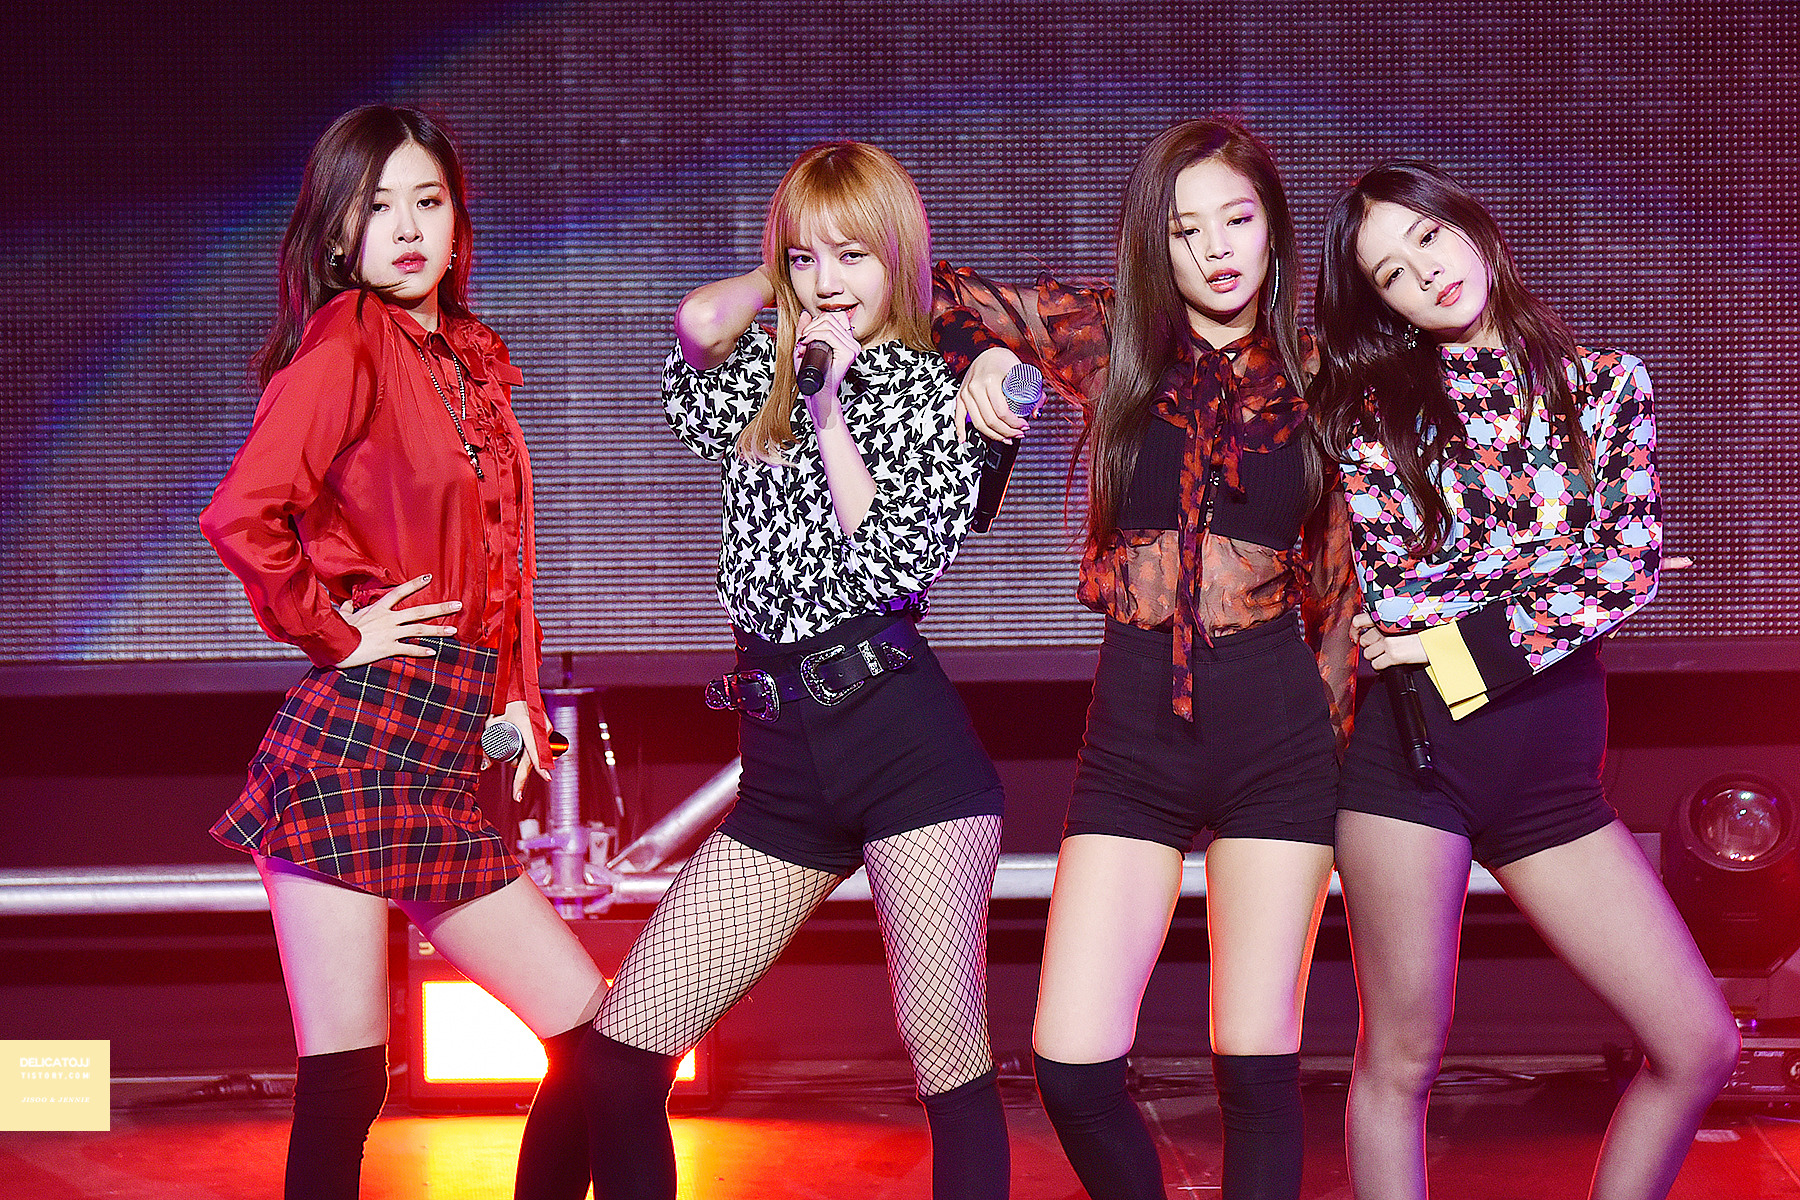 Blackpink discography - Wikipedia